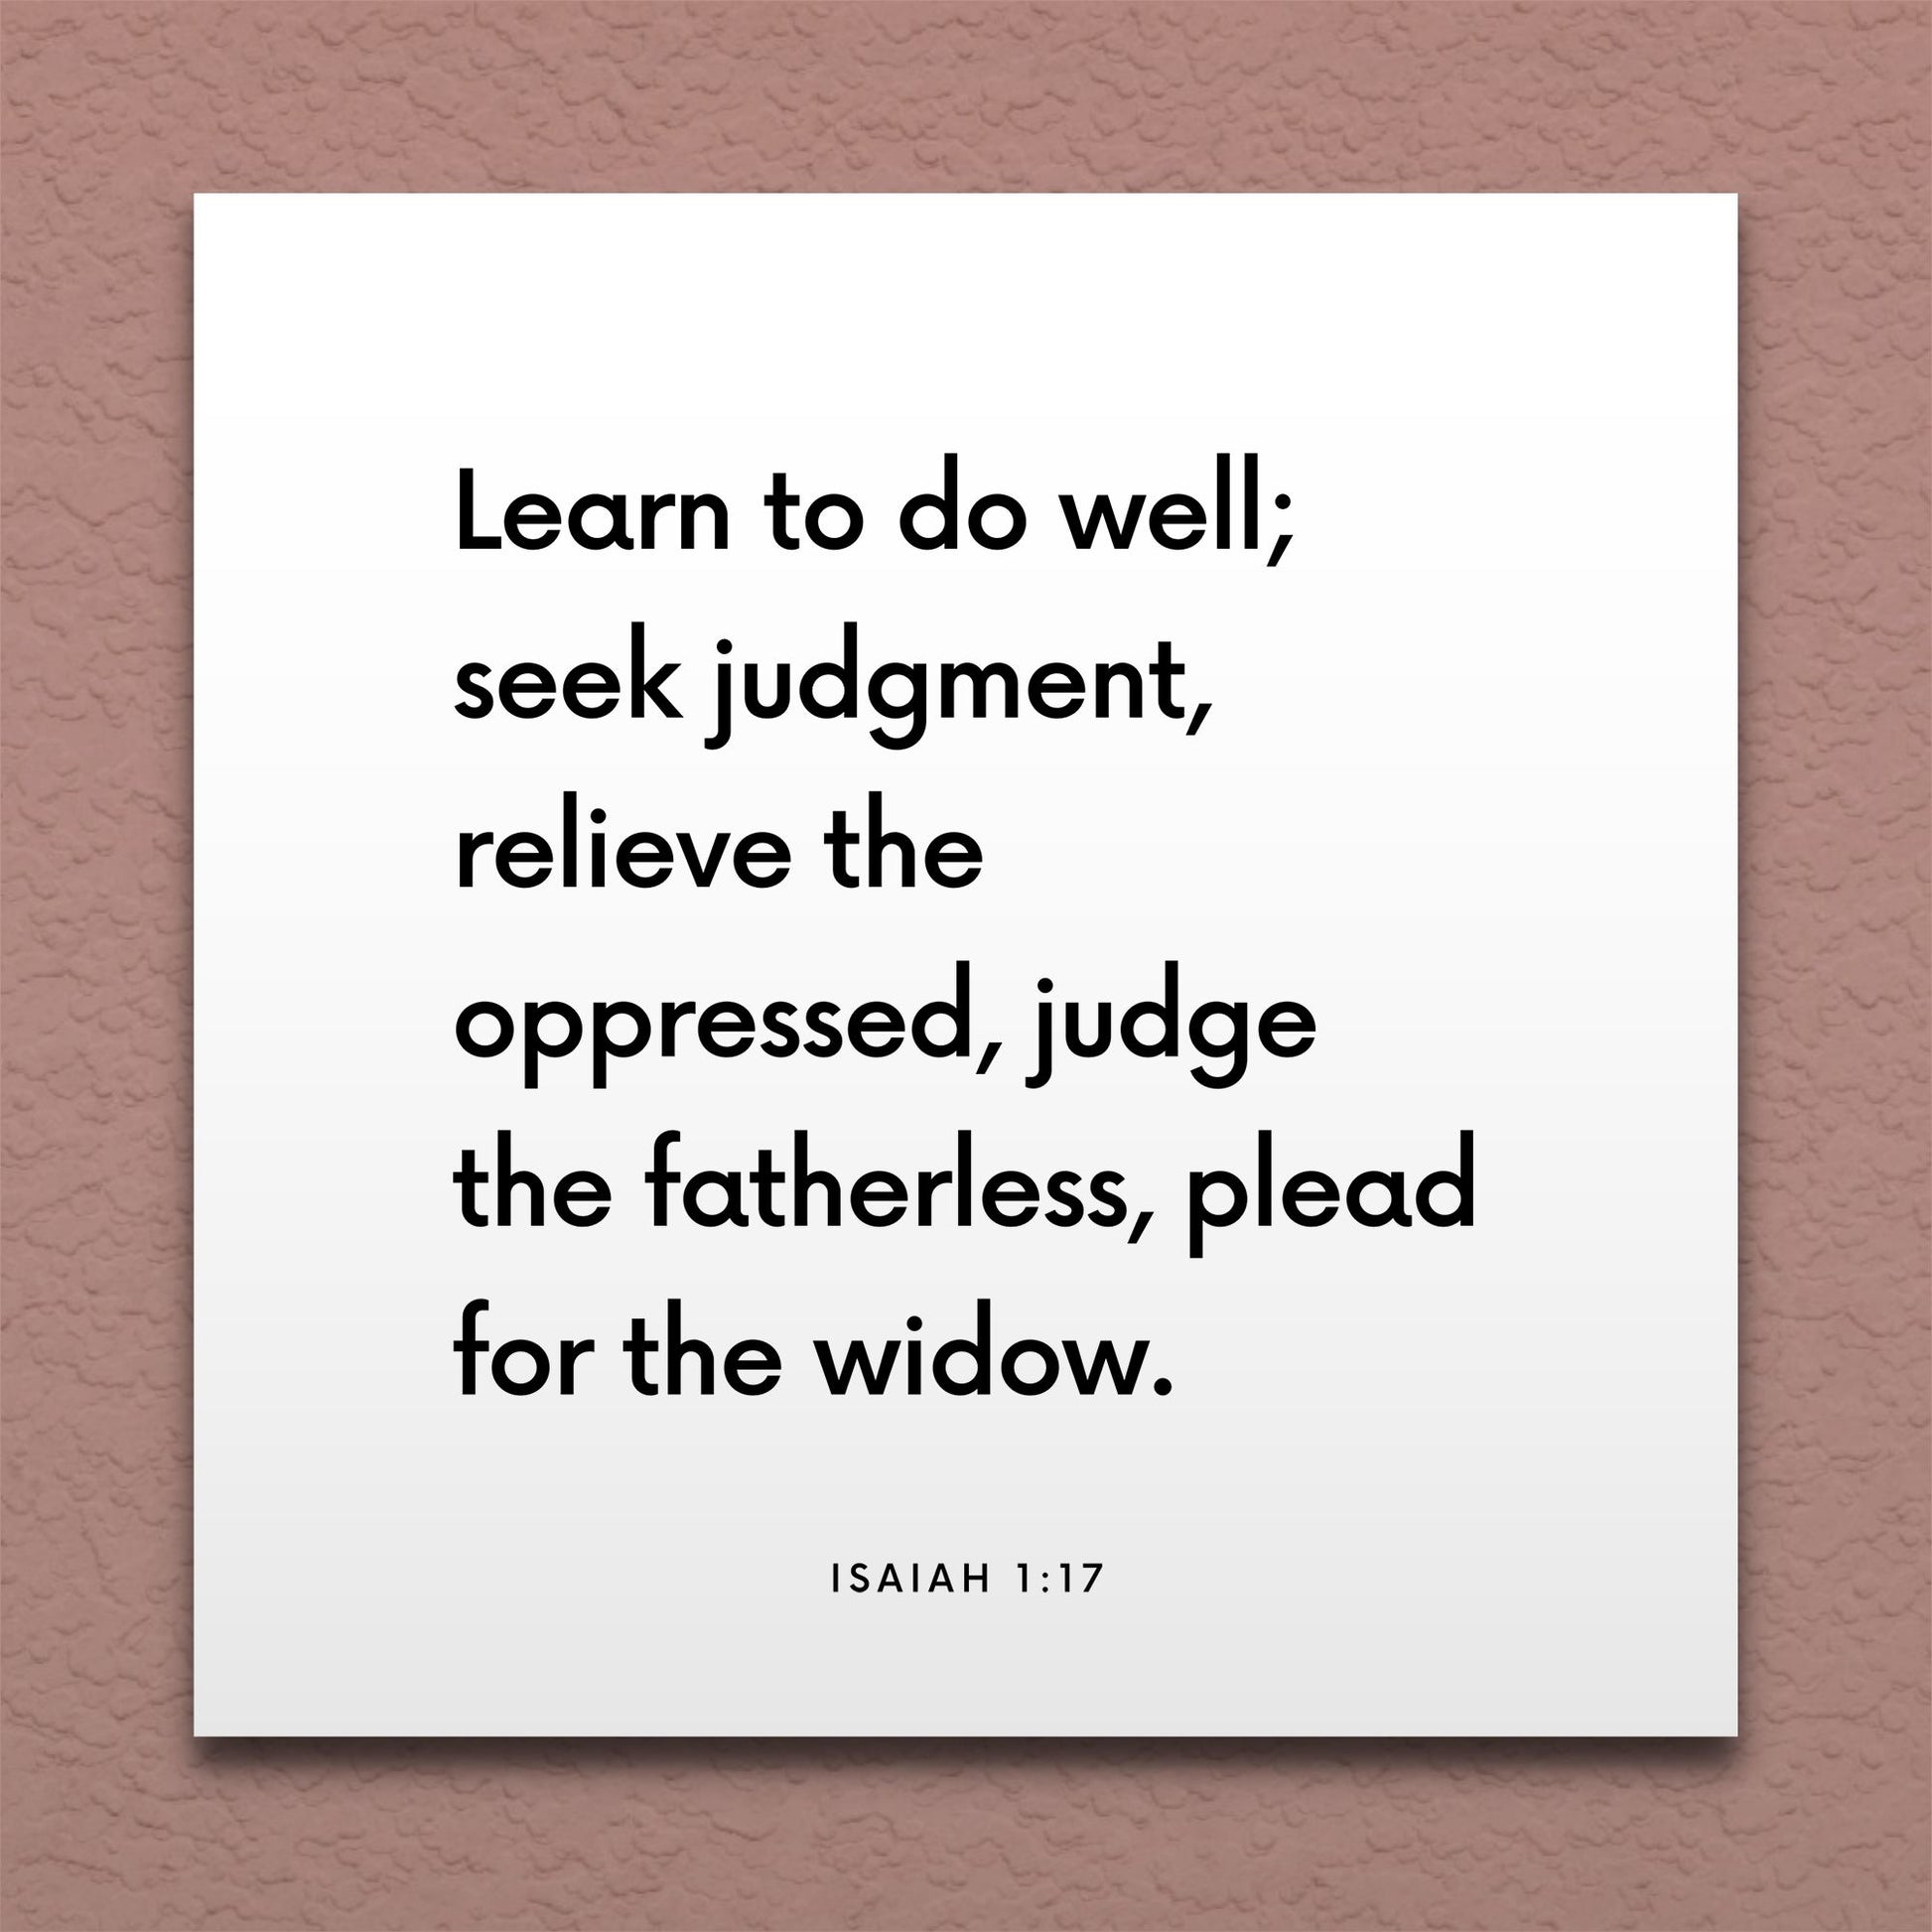 Wall-mounted scripture tile for Isaiah 1:17 - "Learn to do well; seek judgment, relieve the oppressed"